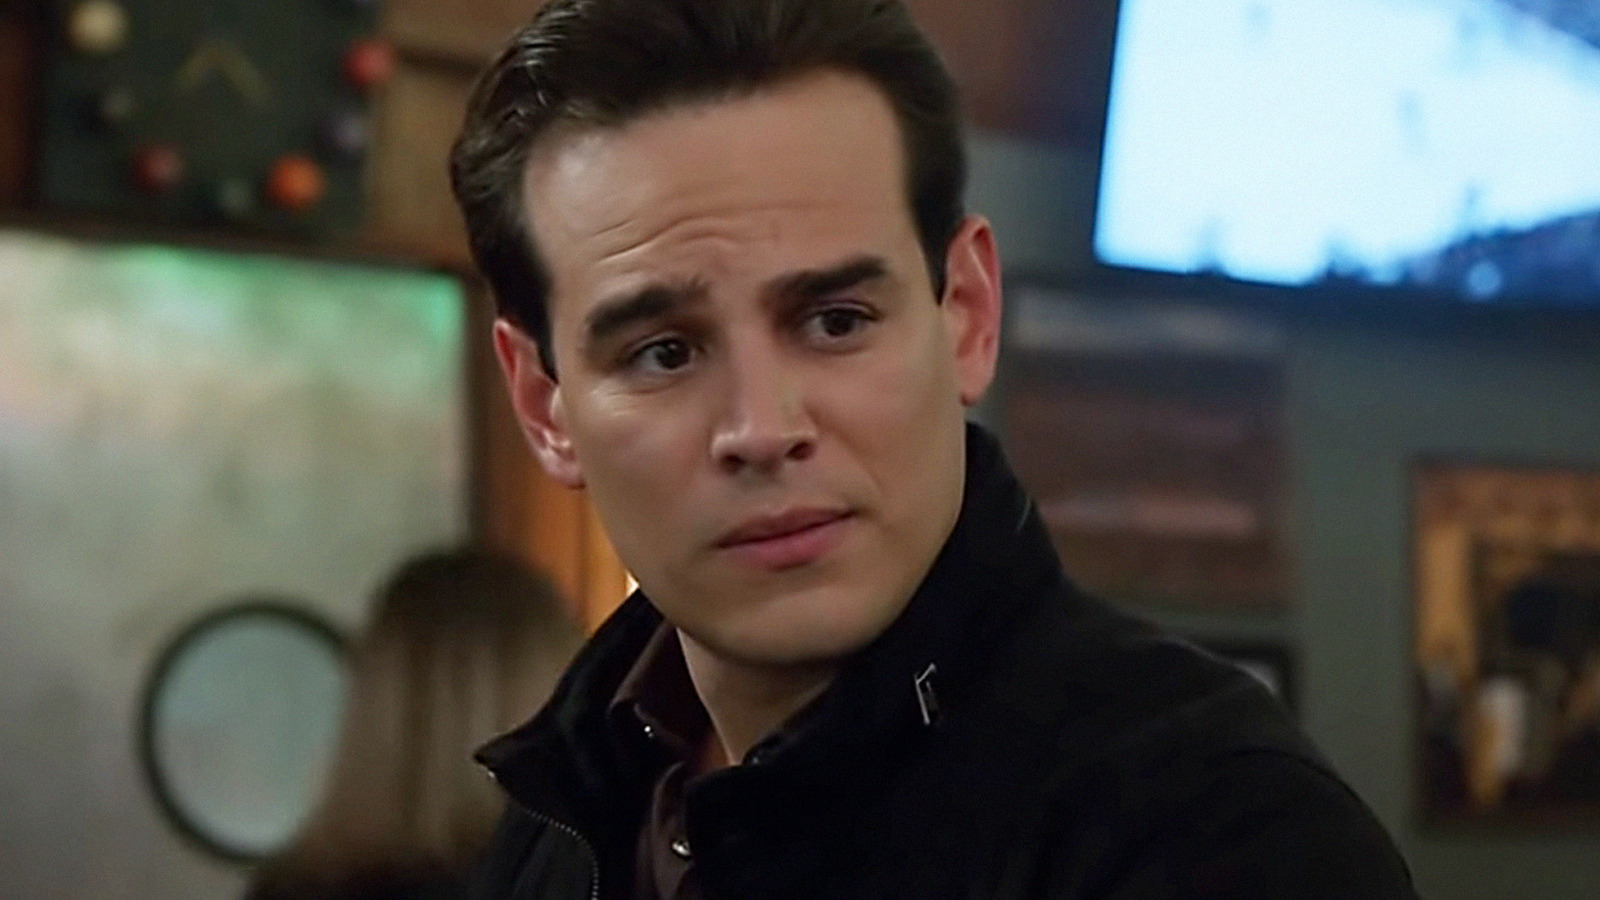 Chicago Fire's Alberto Rosende Shares Message After Quitting As Blake Gallo